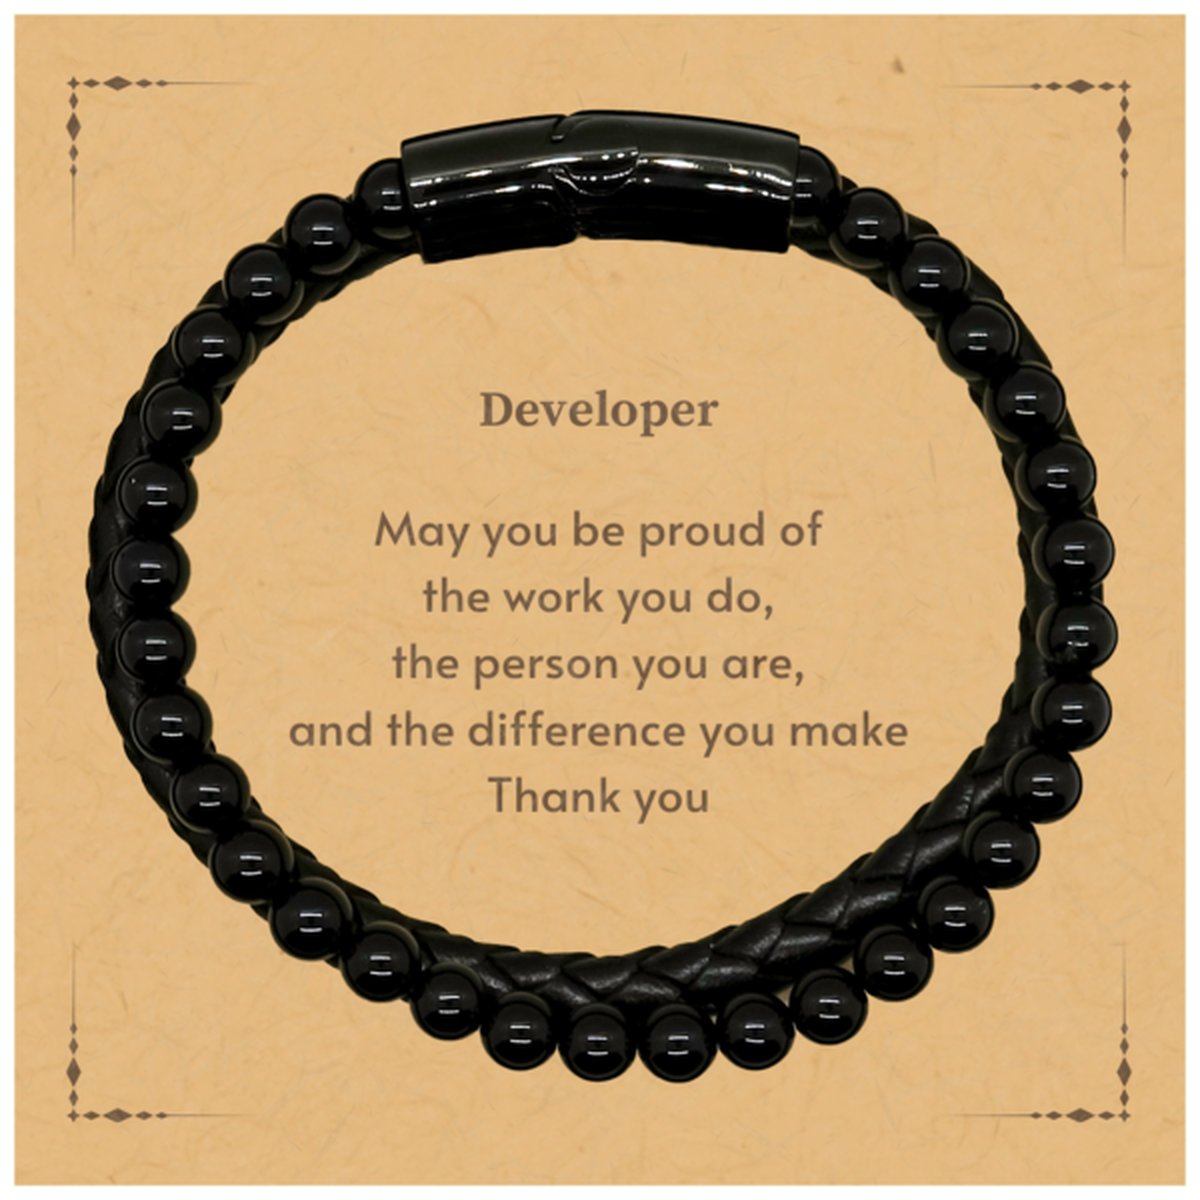 Heartwarming Stone Leather Bracelets Retirement Coworkers Gifts for Developer, Developer May You be proud of the work you do, the person you are Gifts for Boss Men Women Friends